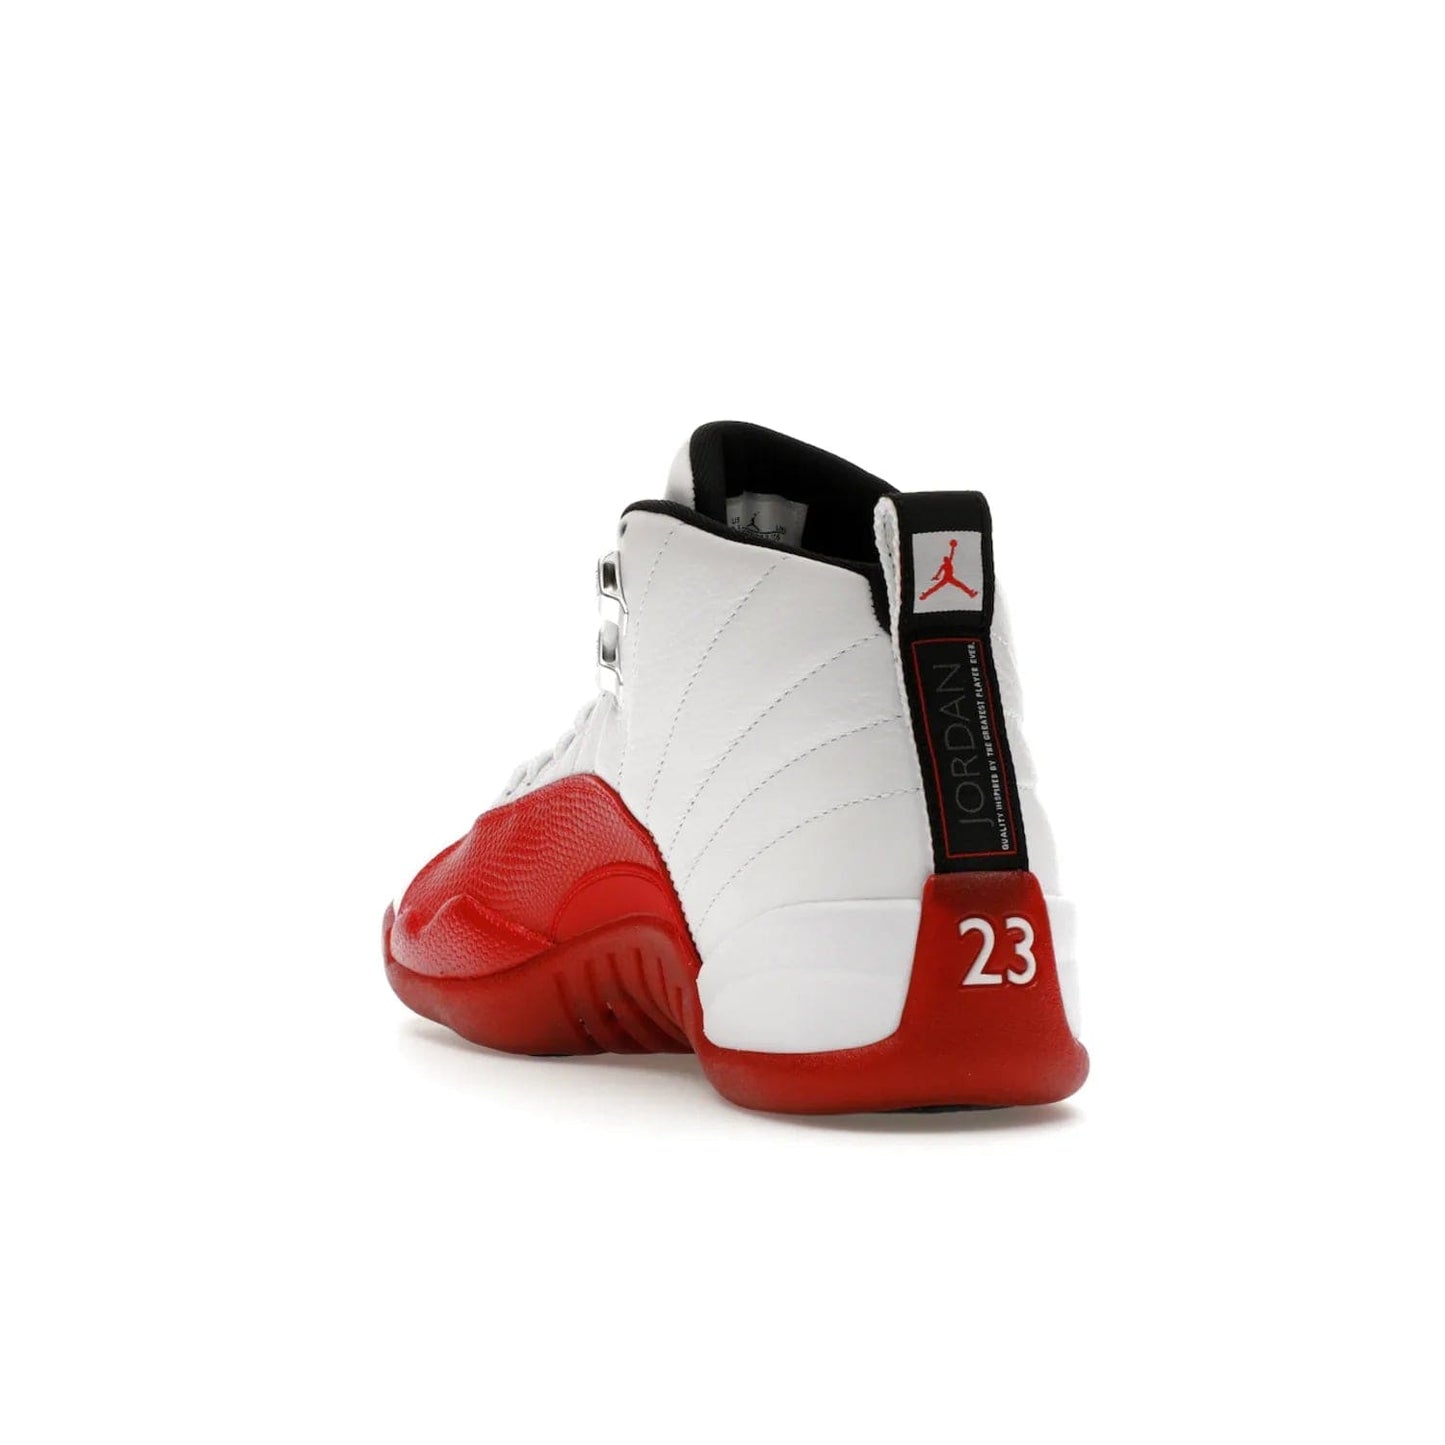 Jordan 12 Retro Cherry (2023) - Image 25 - Only at www.BallersClubKickz.com - Live your sneaker legend with the Jordan 12 Retro Cherry. Iconic pebbled leather mudguards, quilted uppers, and varsity red accents make this 1997 classic a must-have for 2023. Shine on with silver hardware and matching midsoles, and bring it all together for limited-edition style on October 28th. Step into Jordan legacy with the Retro Cherry.